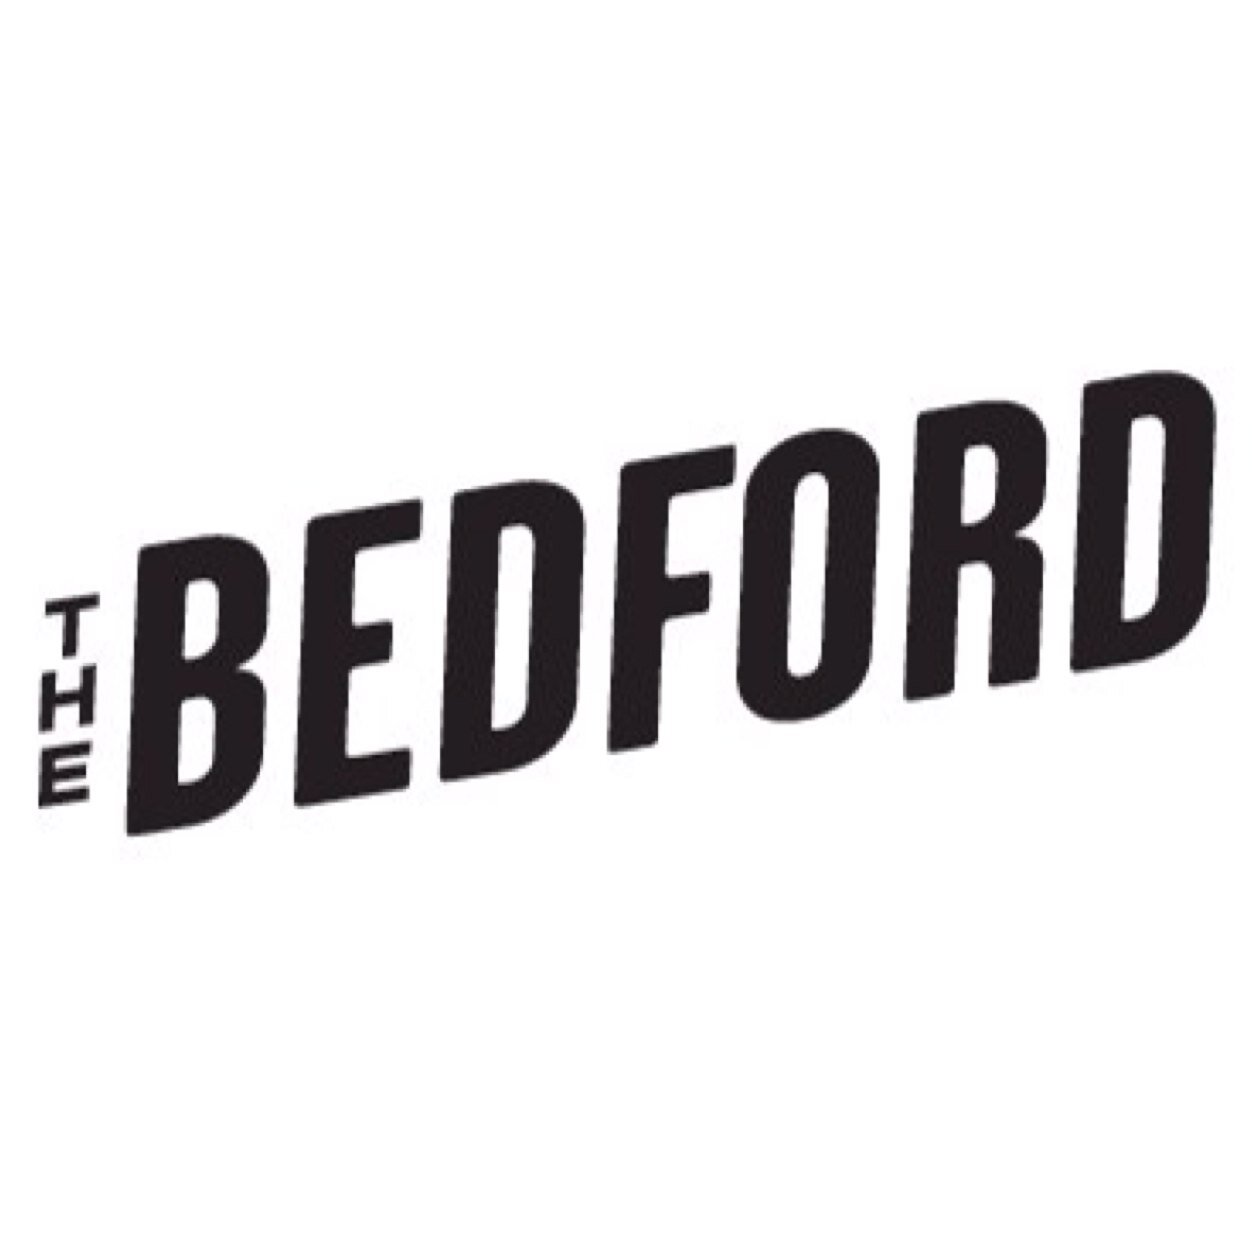 The Bedford is a neighborhood kitchen & bar located in a historic bank. 1612 West Division Street in the Wicker Park neighborhood of Chicago, Illinois.